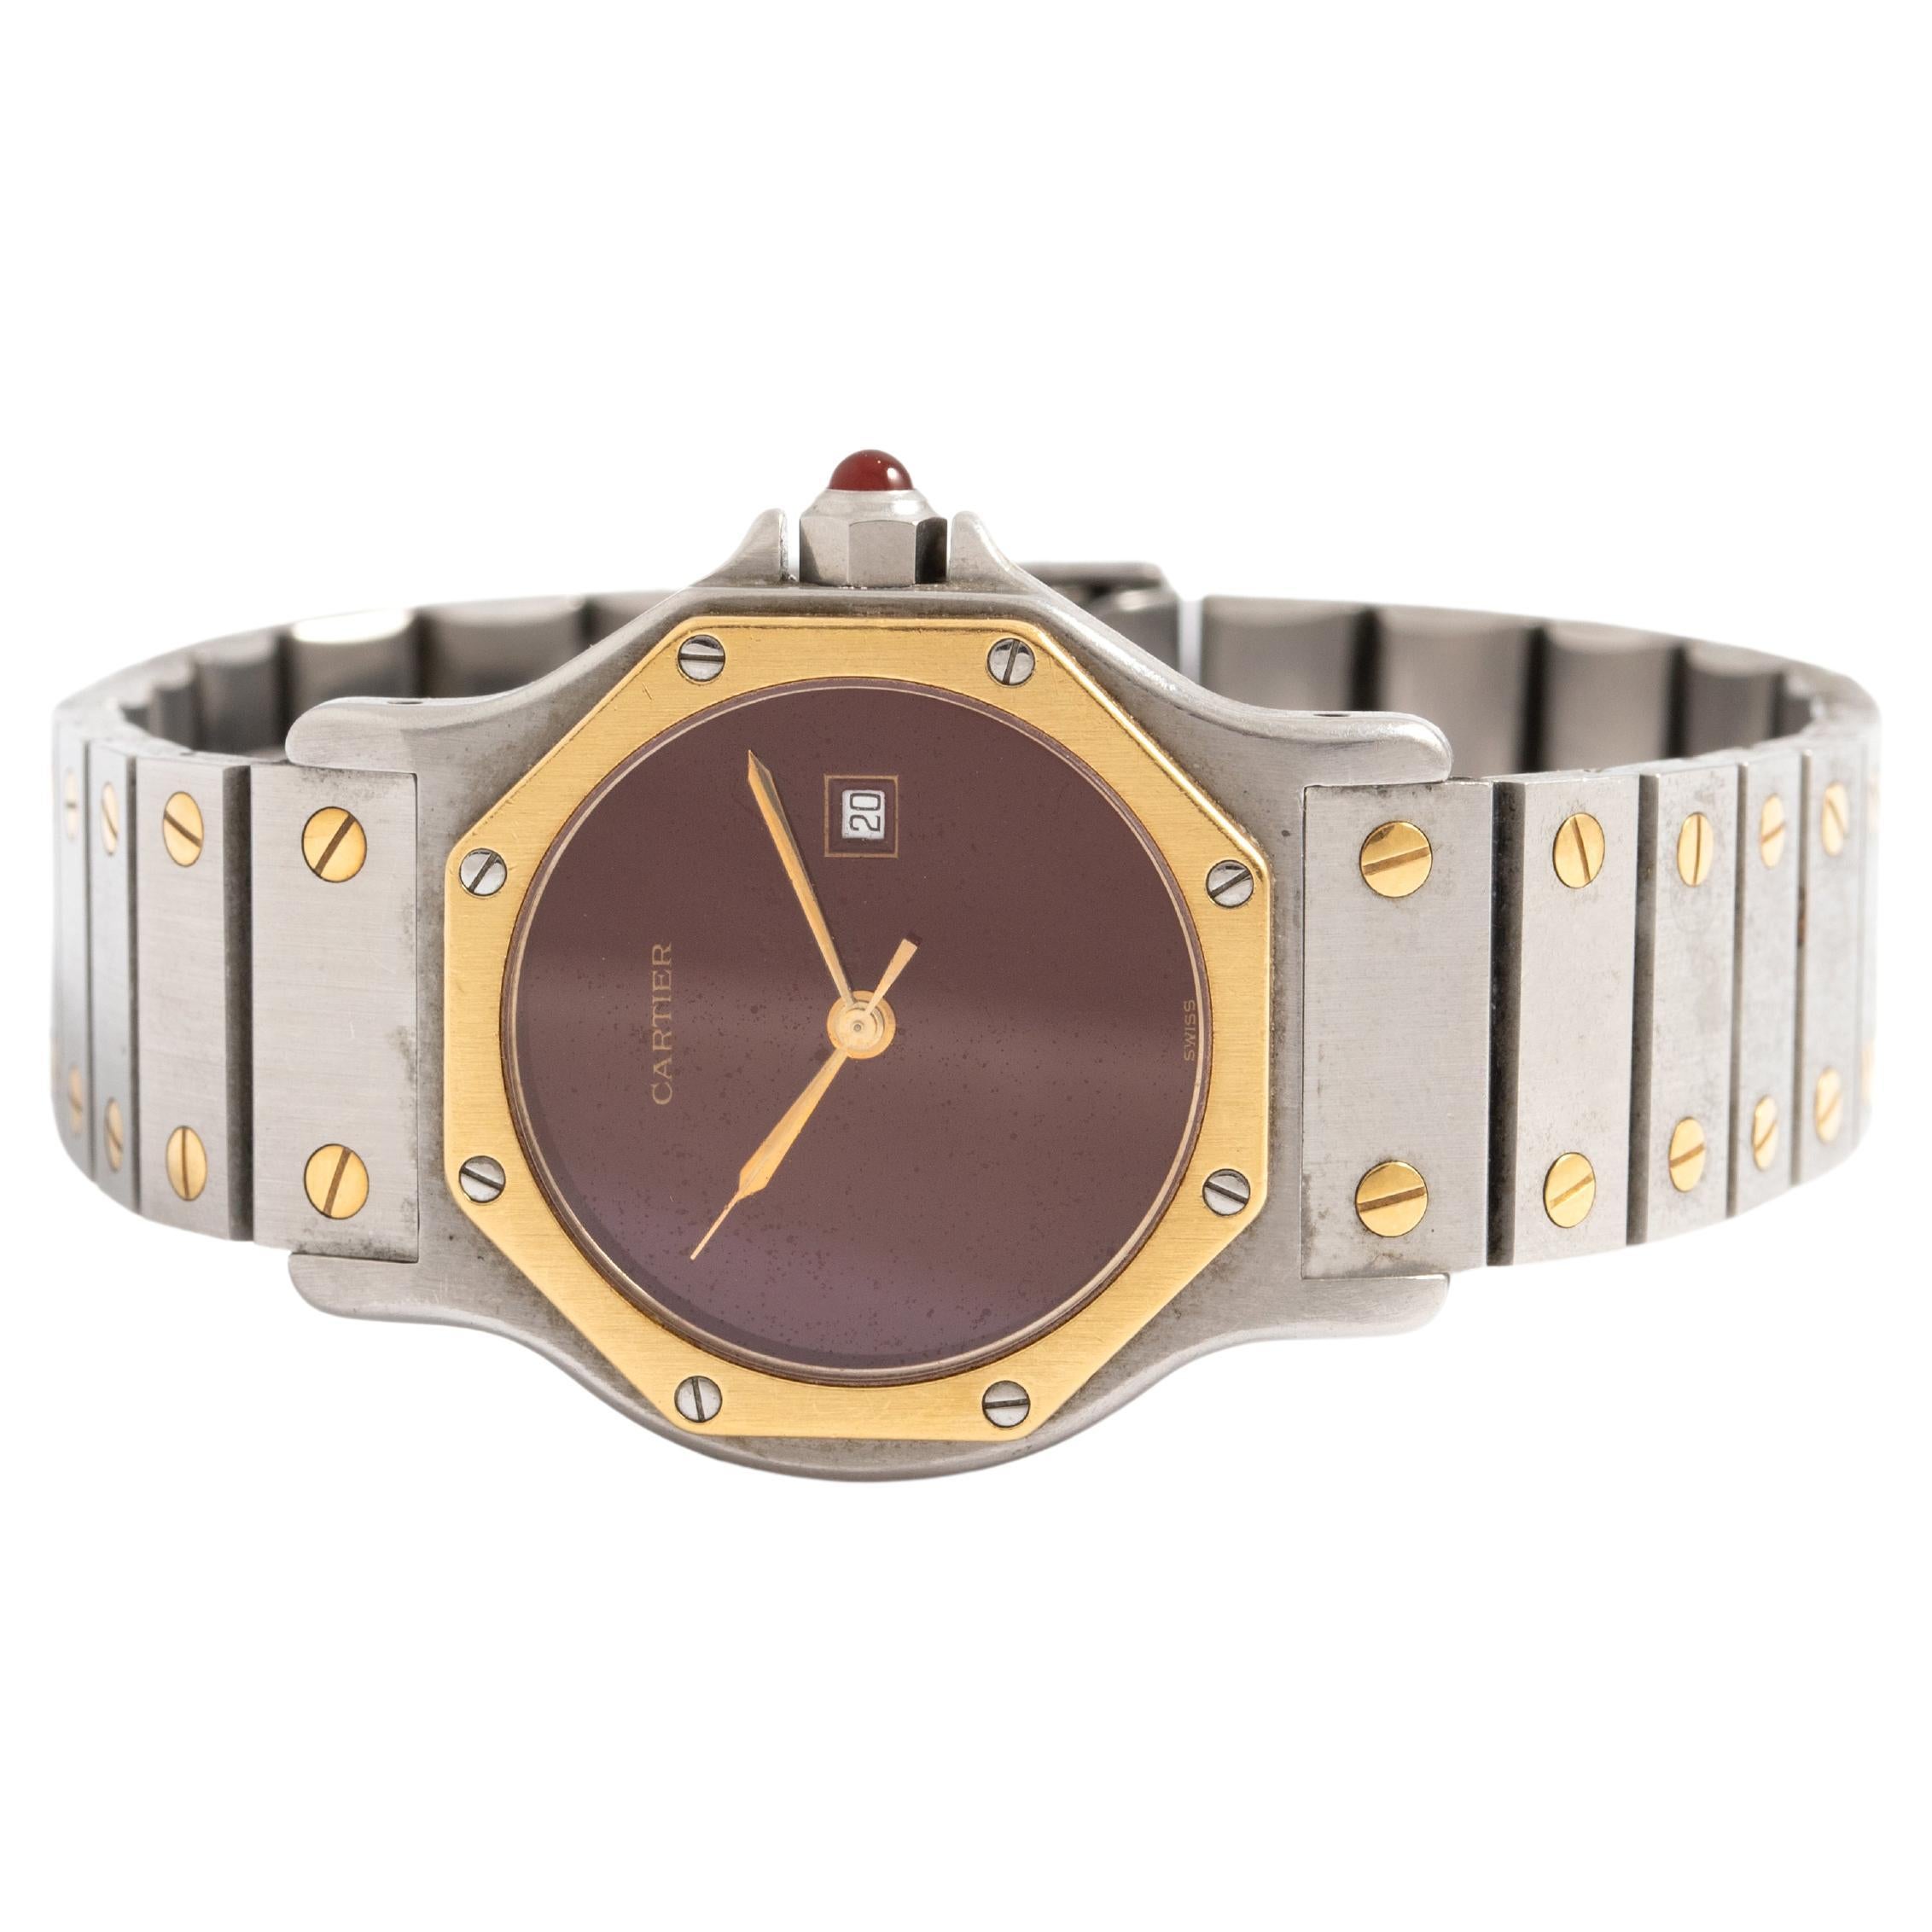 The Cartier Santos watch was created in 1904 when Louis Cartier created a watch for his friend and pilot Alberto Santos-Dumont.

Santos Round Octagon Large LM GM ref. 2966. Circa 1980.

MODEL :
Santos Round Octagon 18k Yellow Gold and Stainless